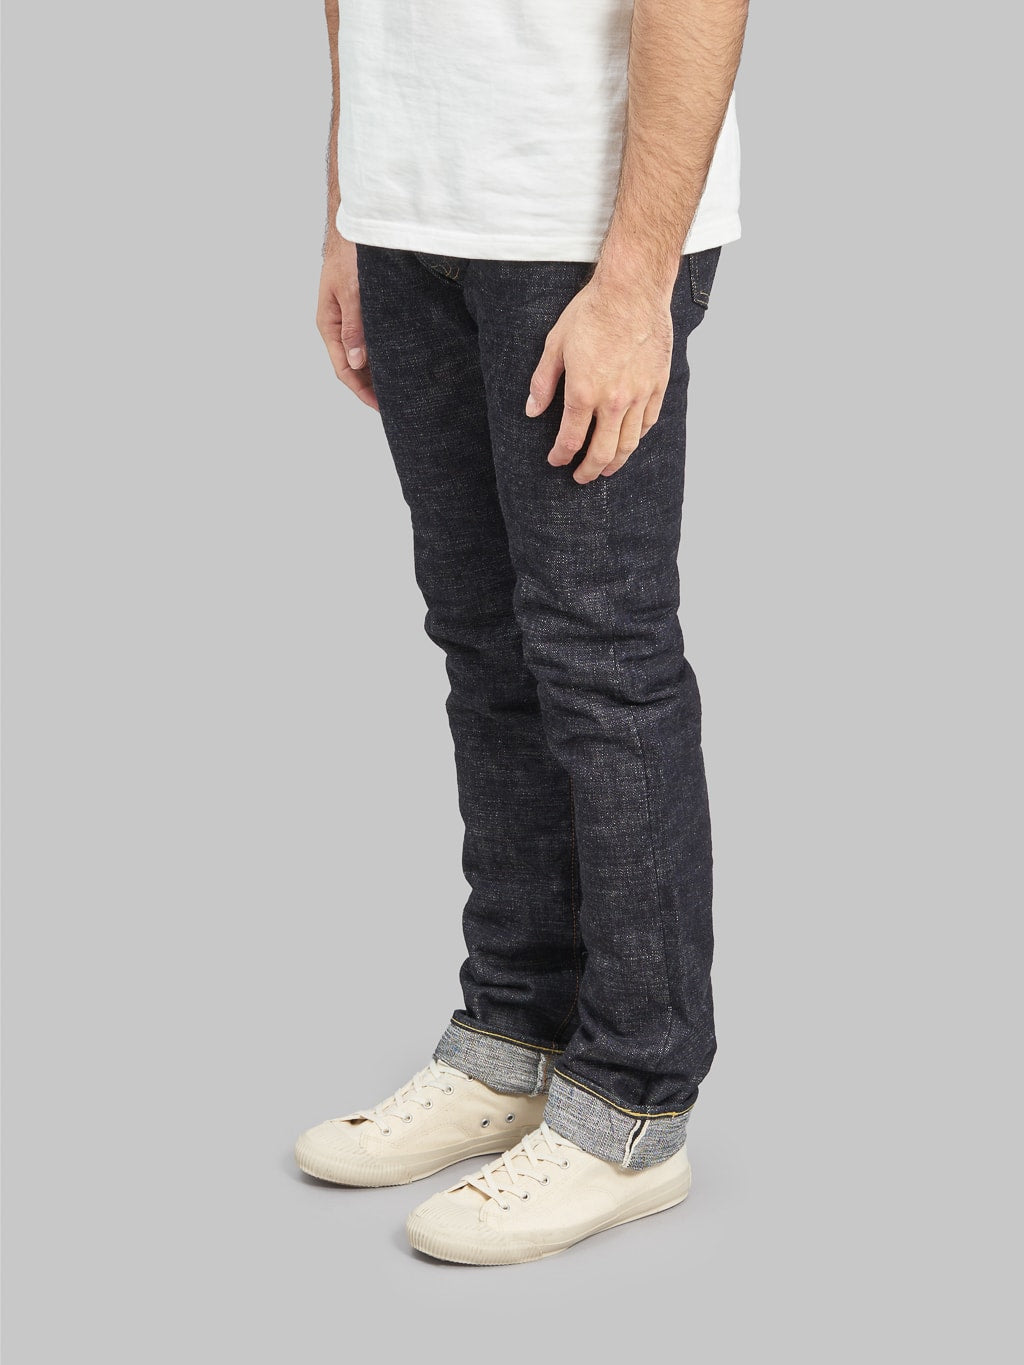 The Strike Gold 7109 Ultra Slubby Slim Tapered Jeans side fit